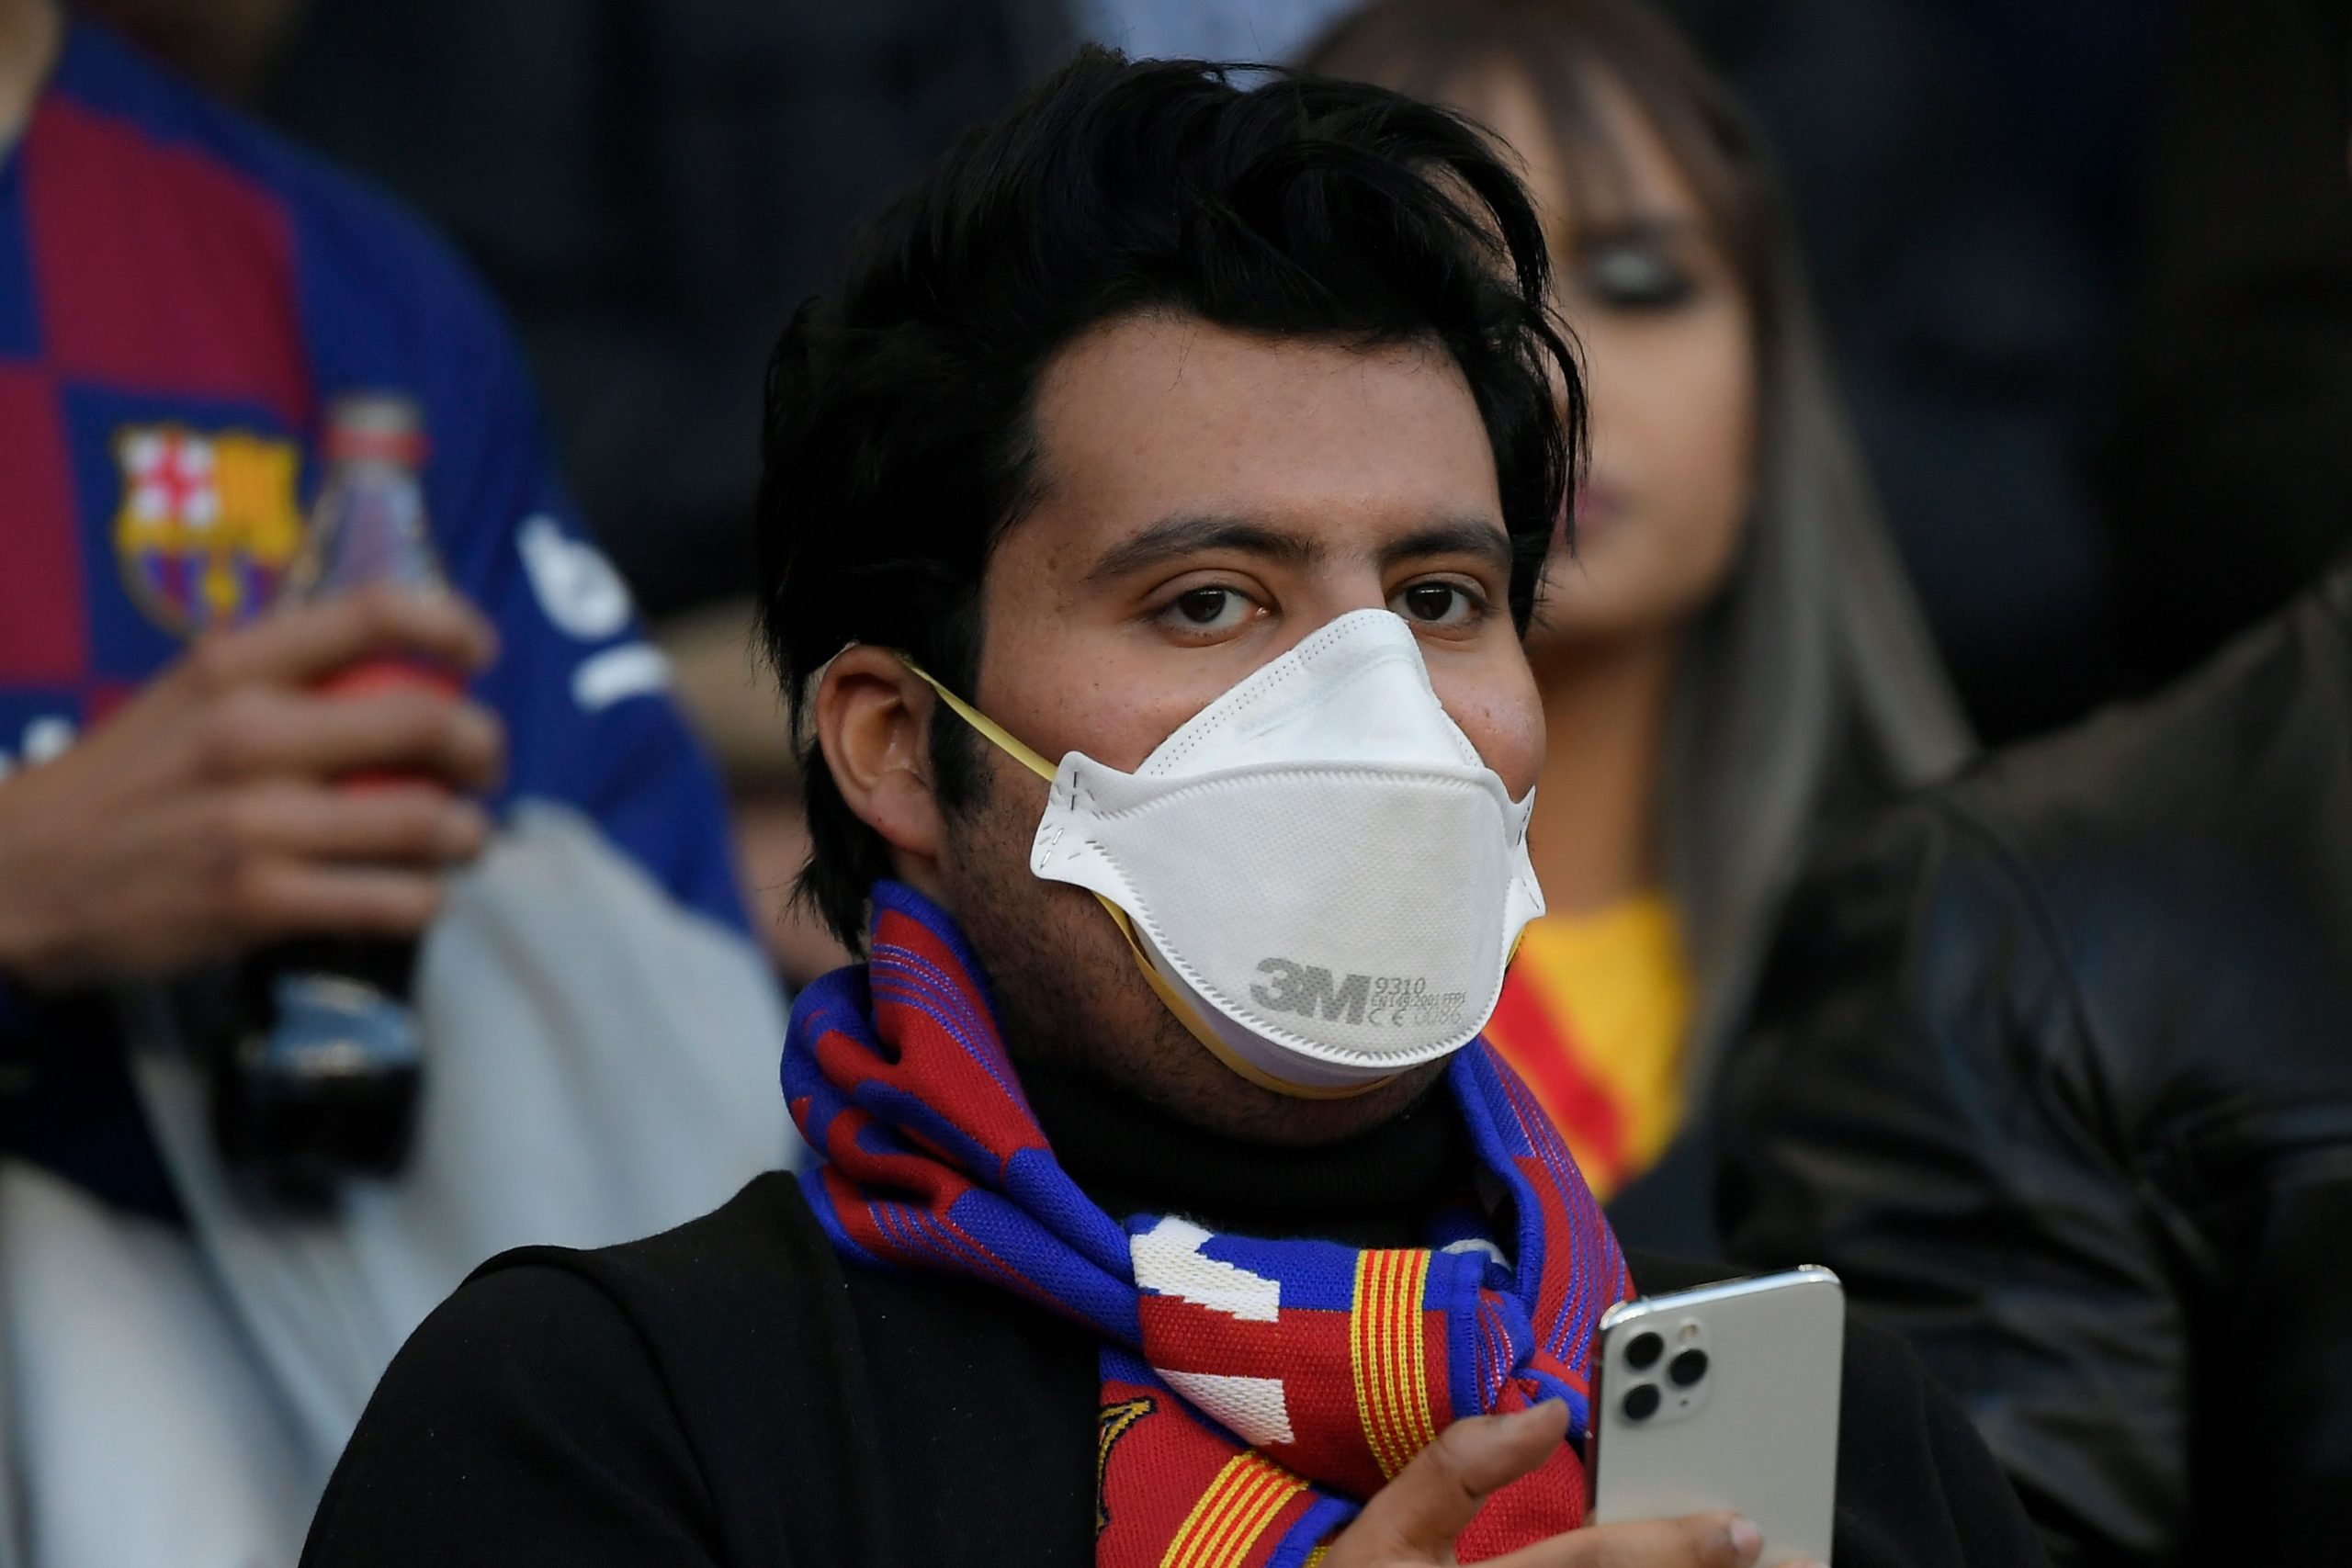 A man wearing a protective mask in light of the coronavirus outbreak waits for the start of the Spanish league football match between FC Barcelona and Real Sociedad at the Camp Nou stadium in Barcelona on March 7, 2020.